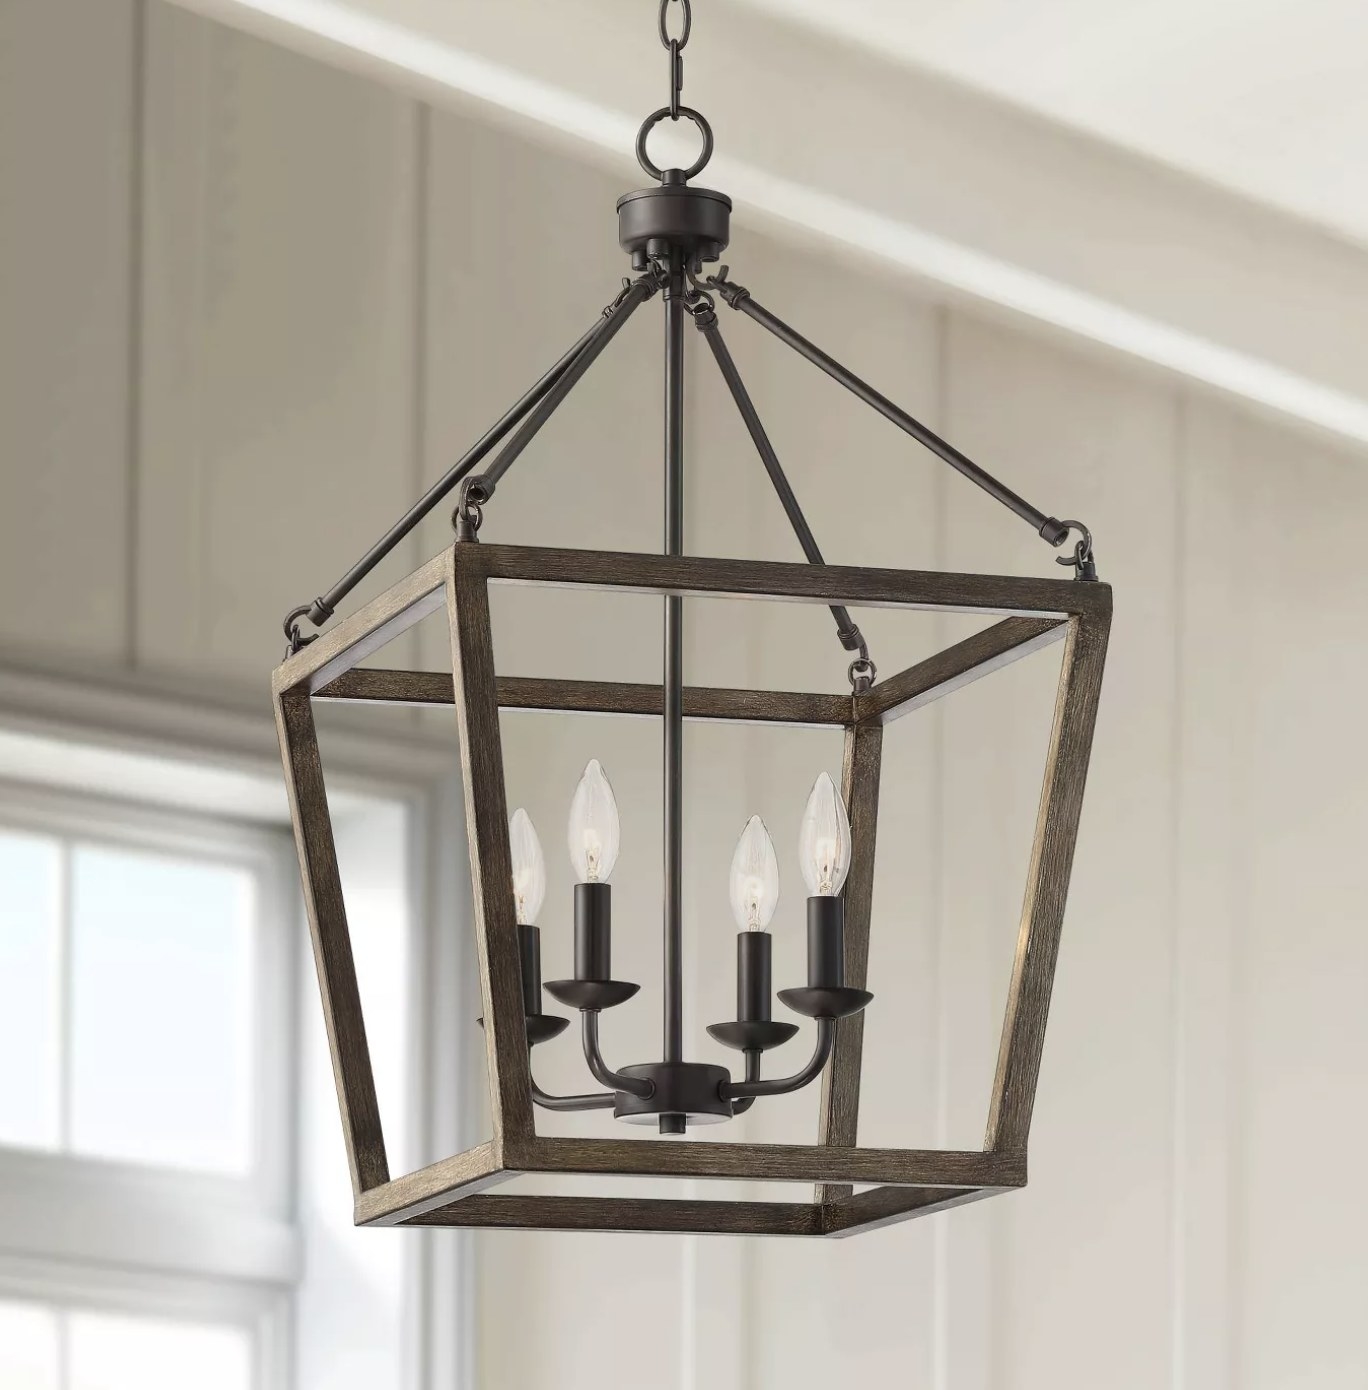 A rustic chandelier with four candlelights inside